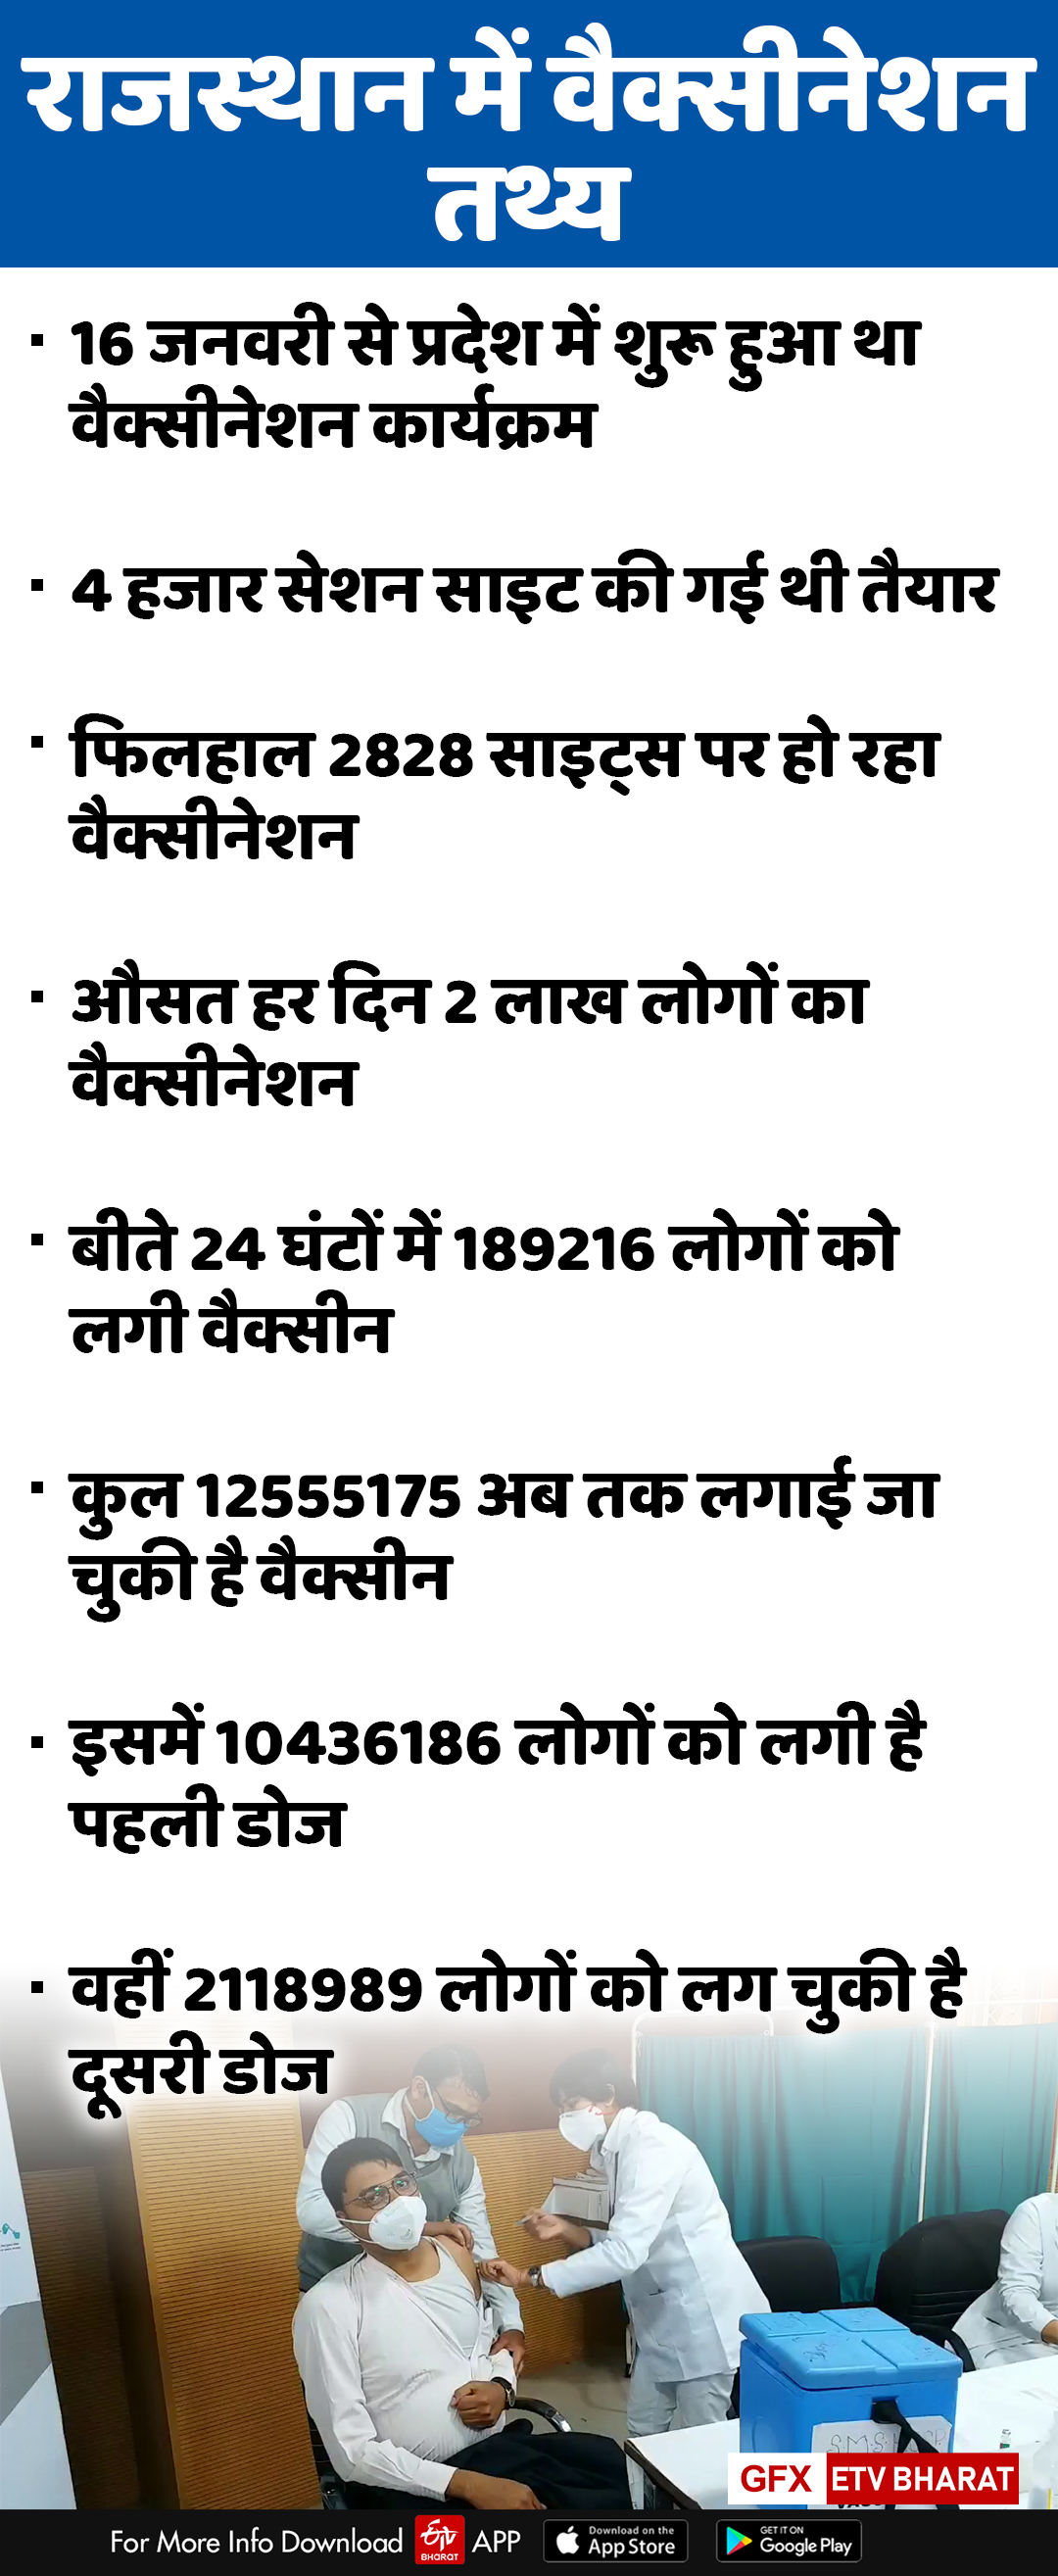 Vaccination in Rajasthan from 1 May